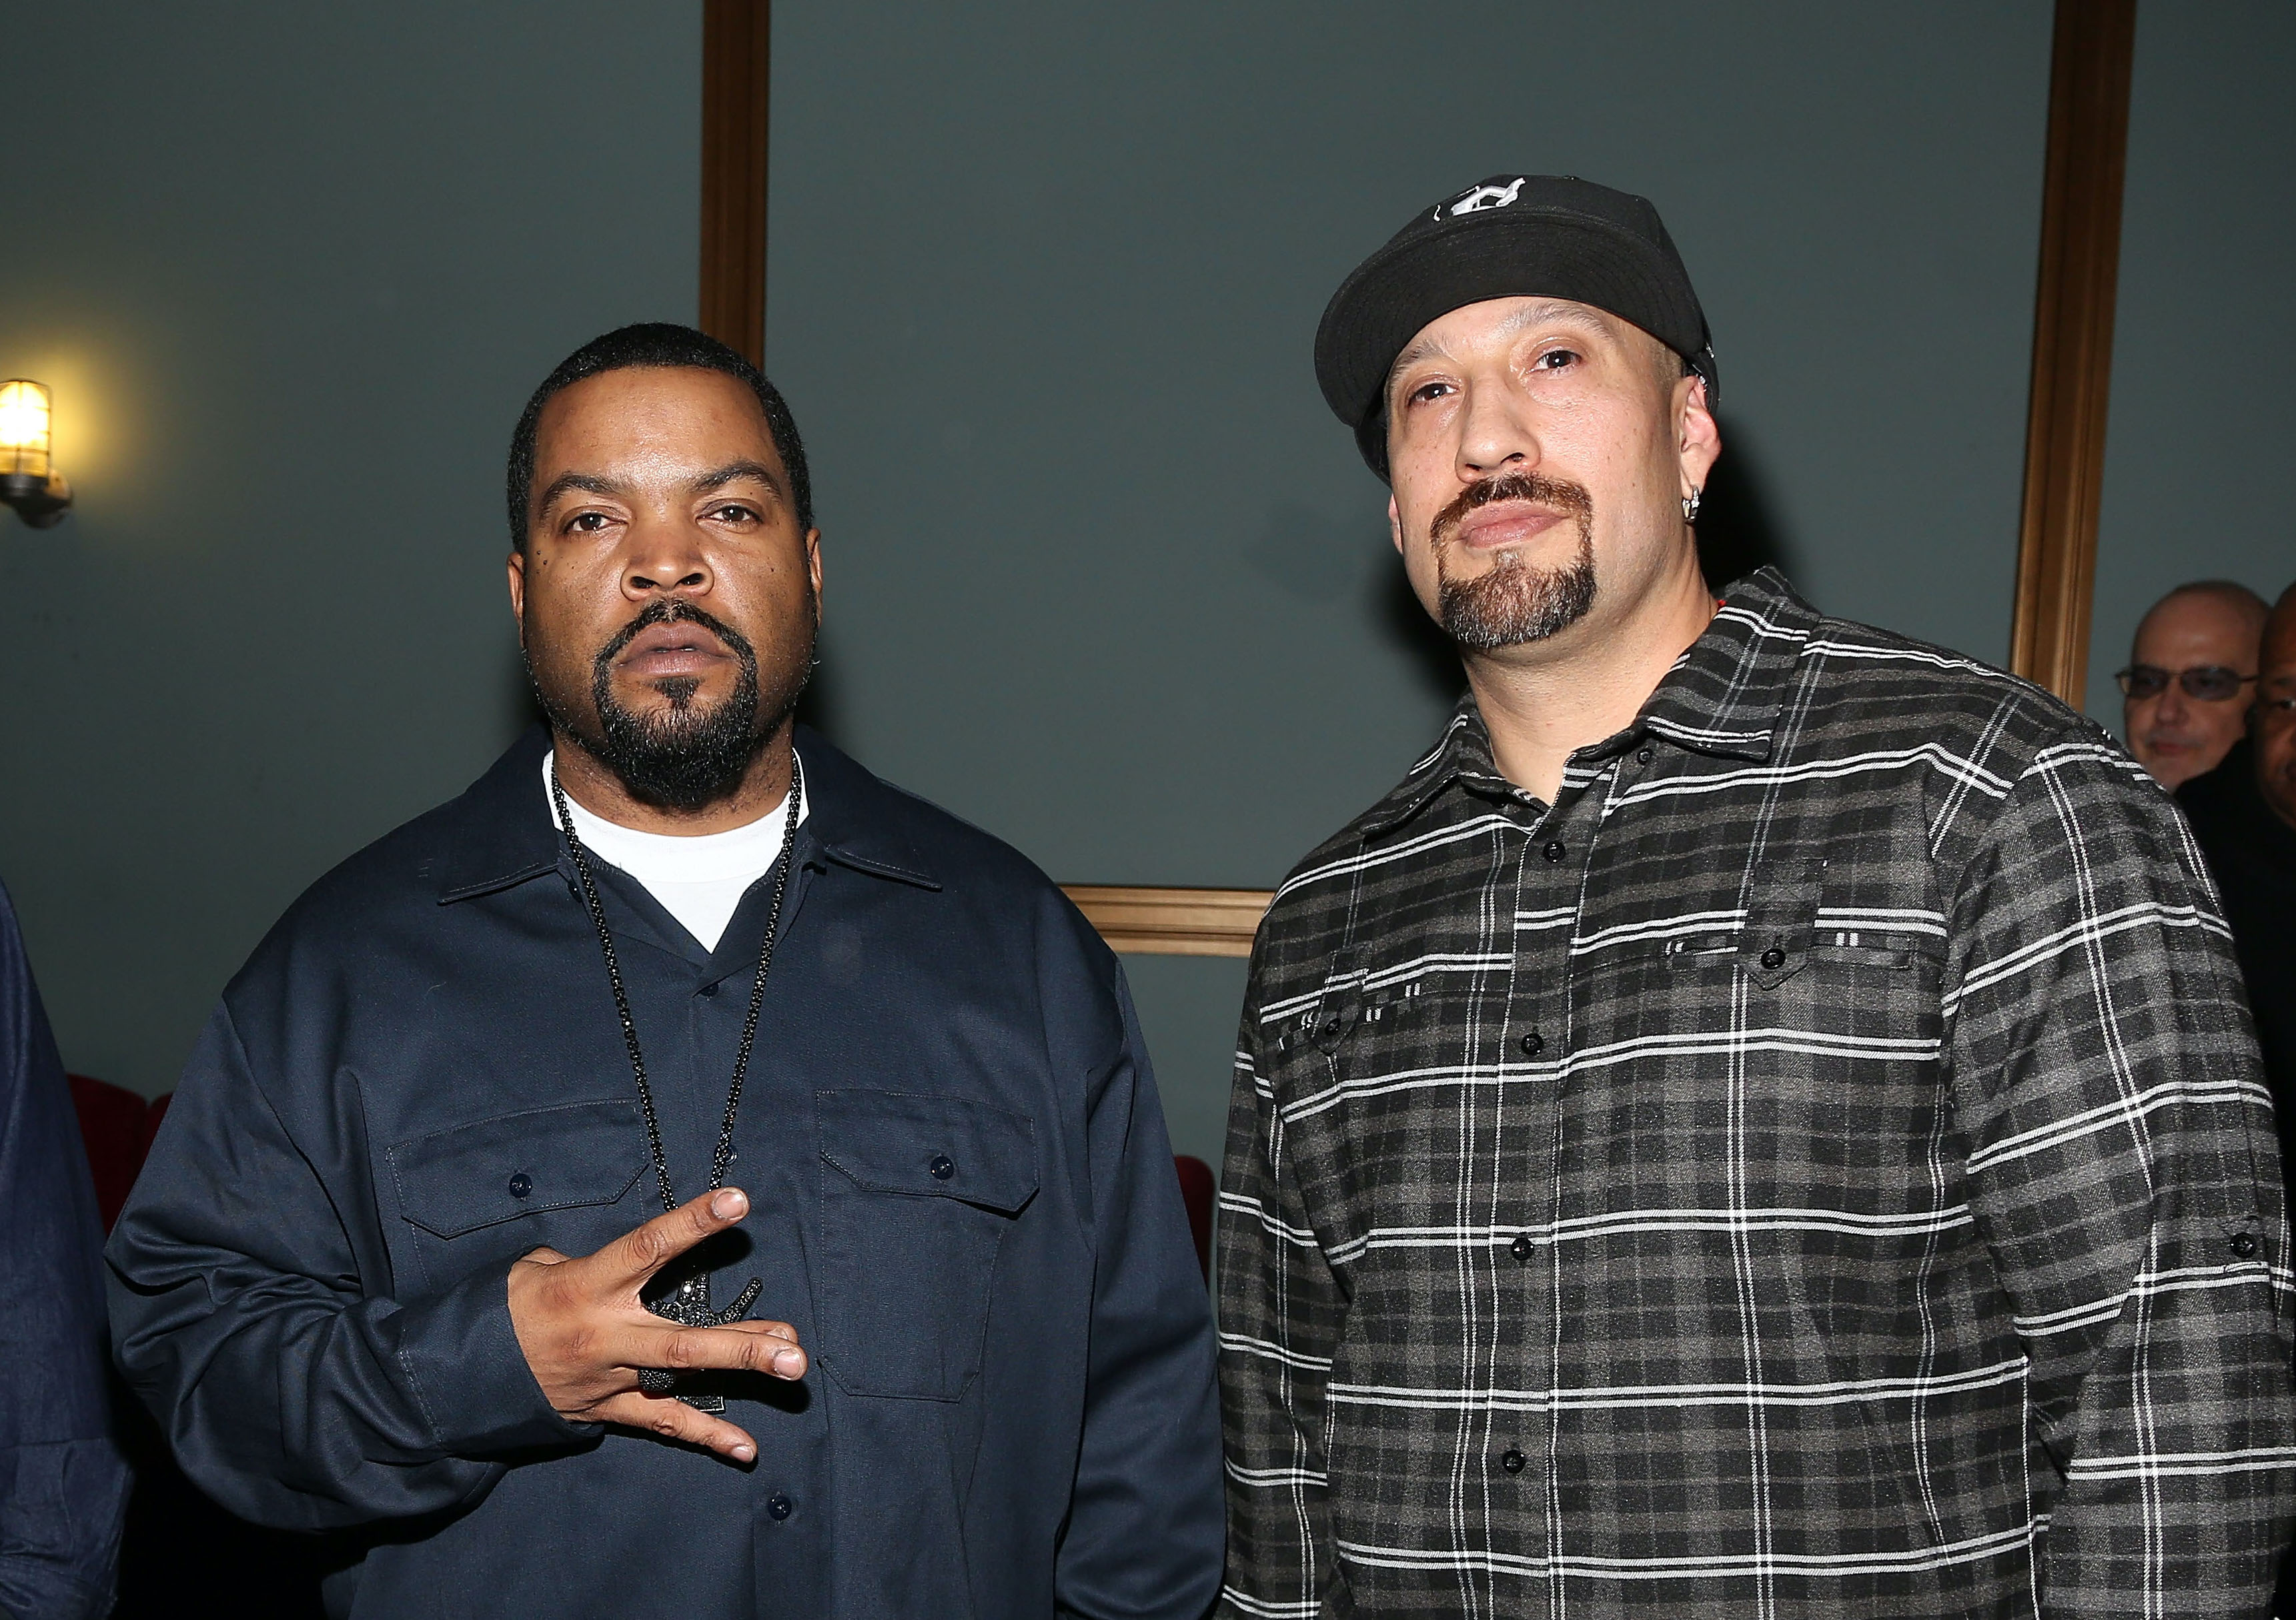 BReal Recounts Being Ice Cube's "Armed Security" & Running Into EazyE